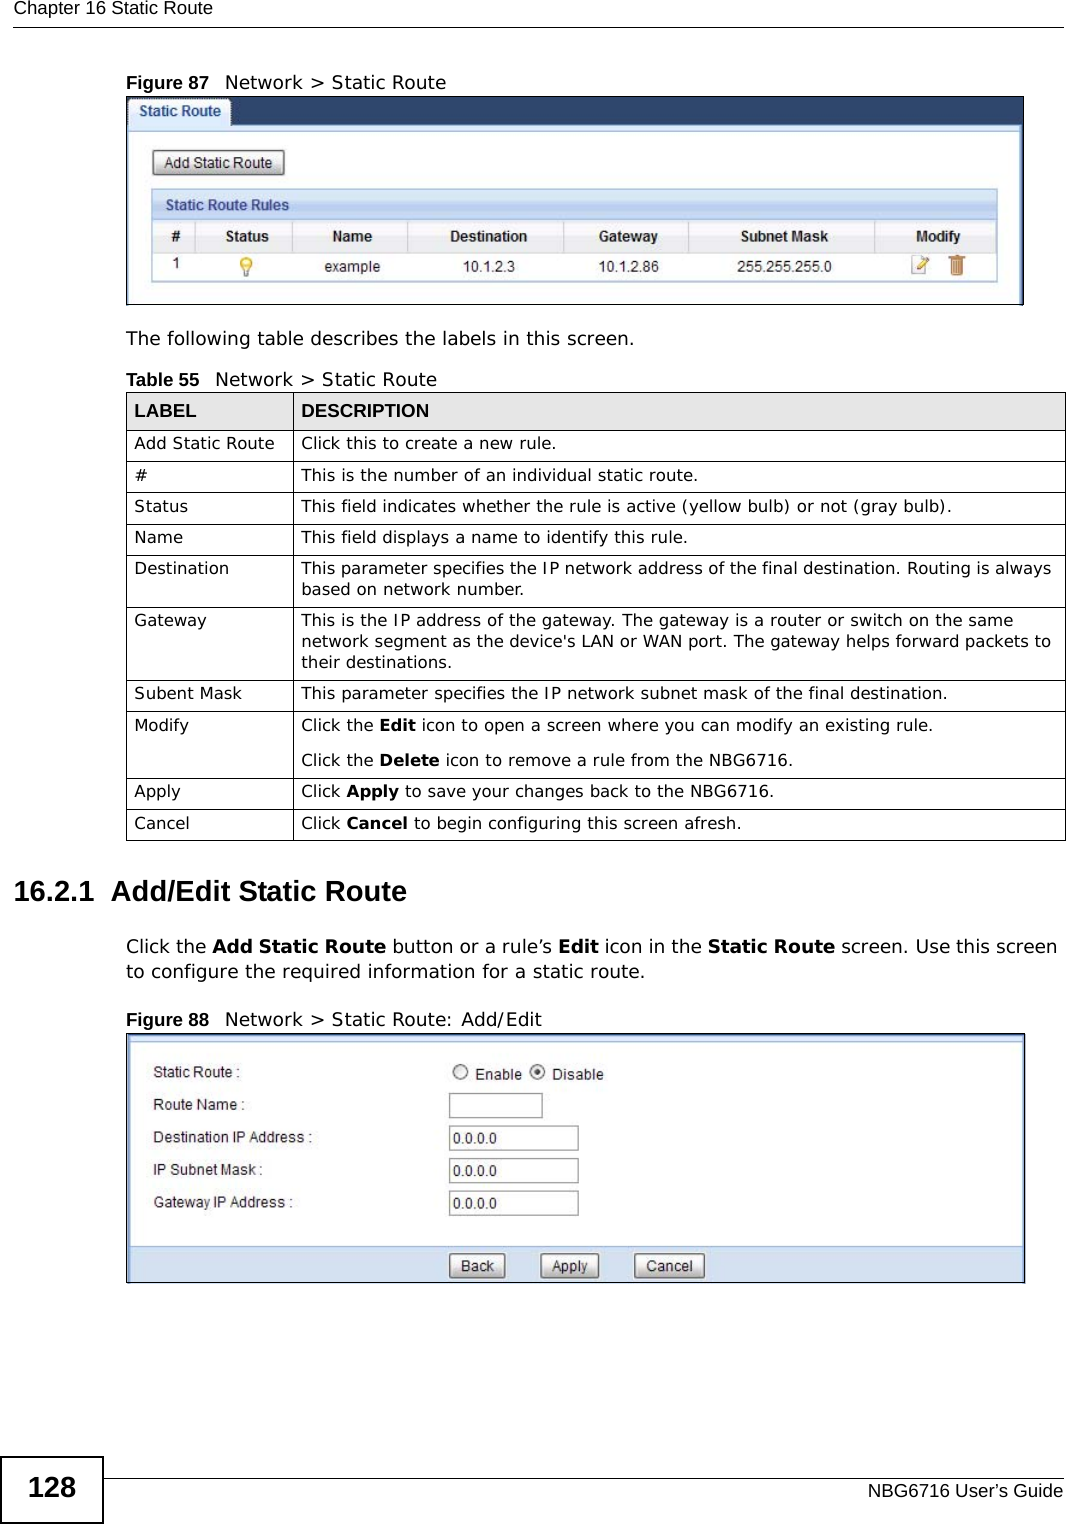 Chapter 16 Static RouteNBG6716 User’s Guide128Figure 87   Network &gt; Static RouteThe following table describes the labels in this screen. 16.2.1  Add/Edit Static Route  Click the Add Static Route button or a rule’s Edit icon in the Static Route screen. Use this screen to configure the required information for a static route. Figure 88   Network &gt; Static Route: Add/Edit Table 55   Network &gt; Static RouteLABEL DESCRIPTIONAdd Static Route Click this to create a new rule.#This is the number of an individual static route.Status This field indicates whether the rule is active (yellow bulb) or not (gray bulb).Name This field displays a name to identify this rule.Destination This parameter specifies the IP network address of the final destination. Routing is always based on network number. Gateway This is the IP address of the gateway. The gateway is a router or switch on the same network segment as the device&apos;s LAN or WAN port. The gateway helps forward packets to their destinations.Subent Mask This parameter specifies the IP network subnet mask of the final destination.Modify Click the Edit icon to open a screen where you can modify an existing rule. Click the Delete icon to remove a rule from the NBG6716.Apply Click Apply to save your changes back to the NBG6716.Cancel Click Cancel to begin configuring this screen afresh.